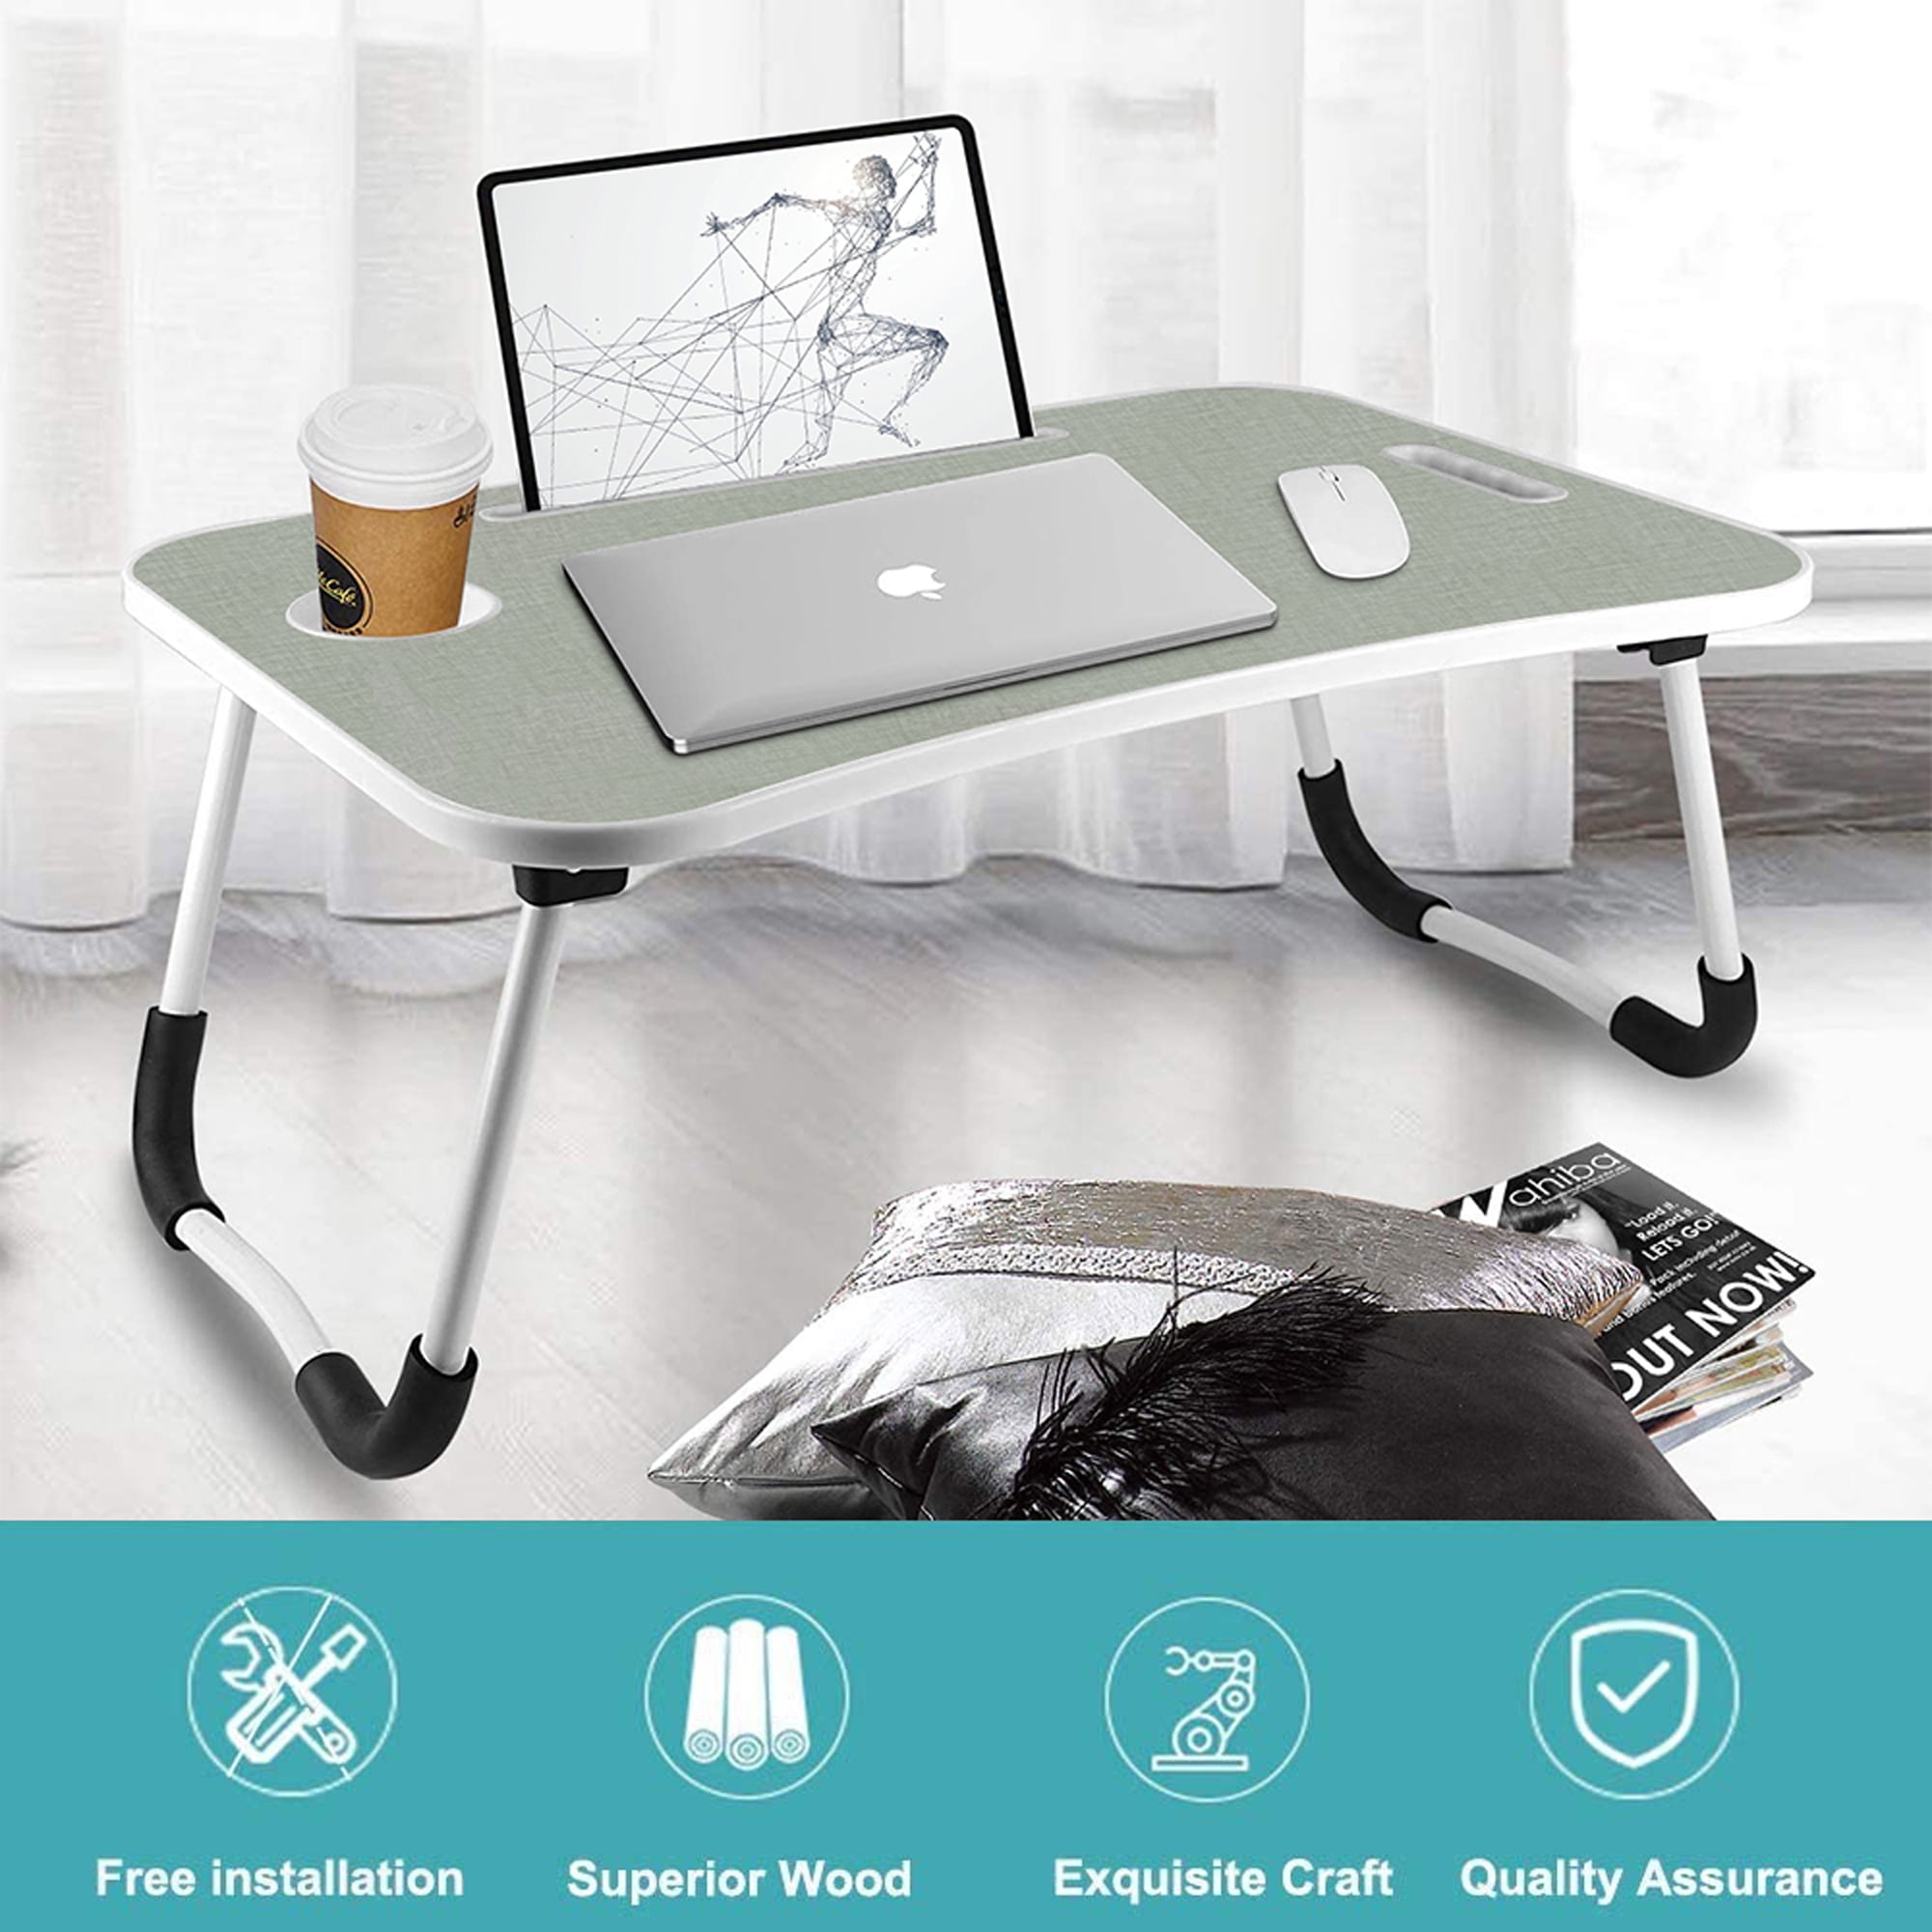 Details about   Folding Laptop Bed Table Portable Foldable Study Computer Desk Stand Bed Desk US 